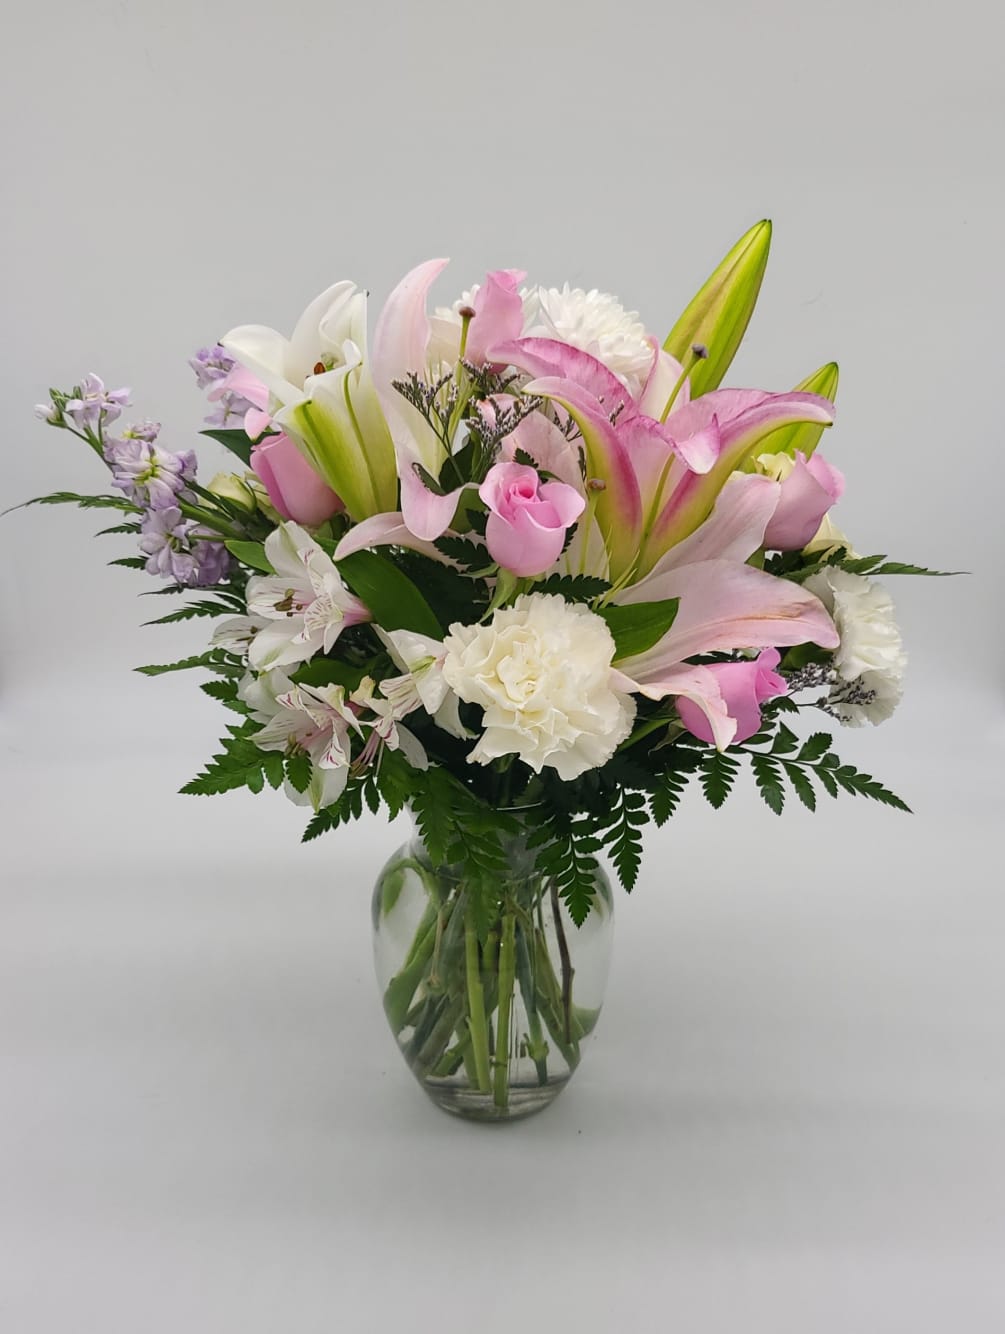 Heavenly hues and pretty petals are in perfect harmony in this gorgeous